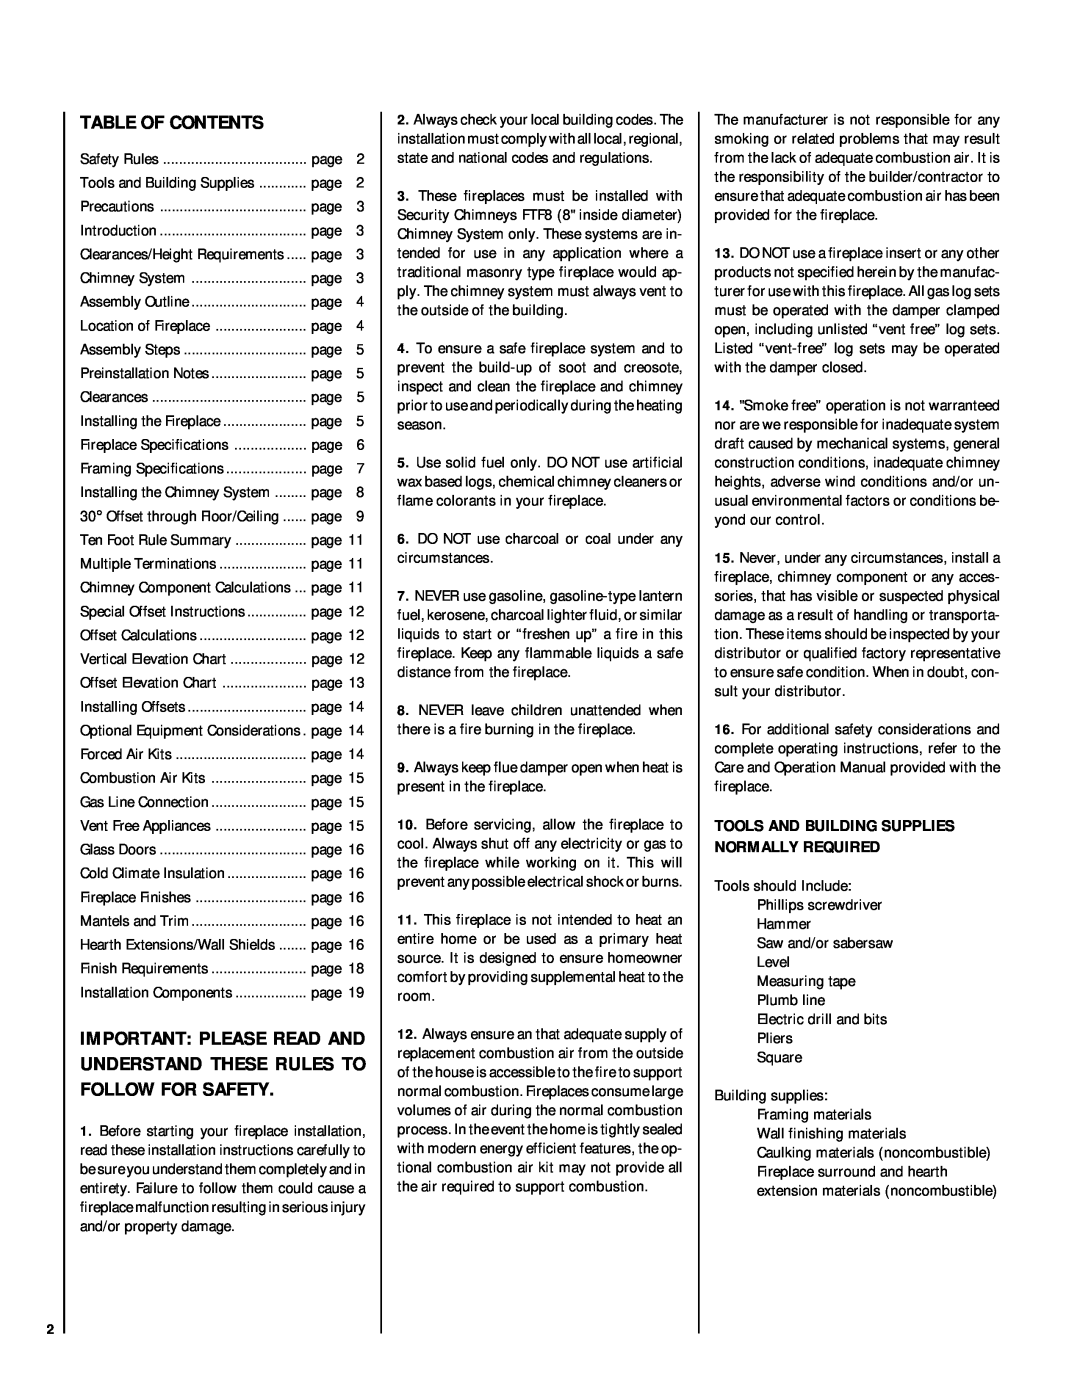 Linksys RDI-36-H HCI-36-H installation instructions Table Of Contents, Tools And Building Supplies Normally Required 